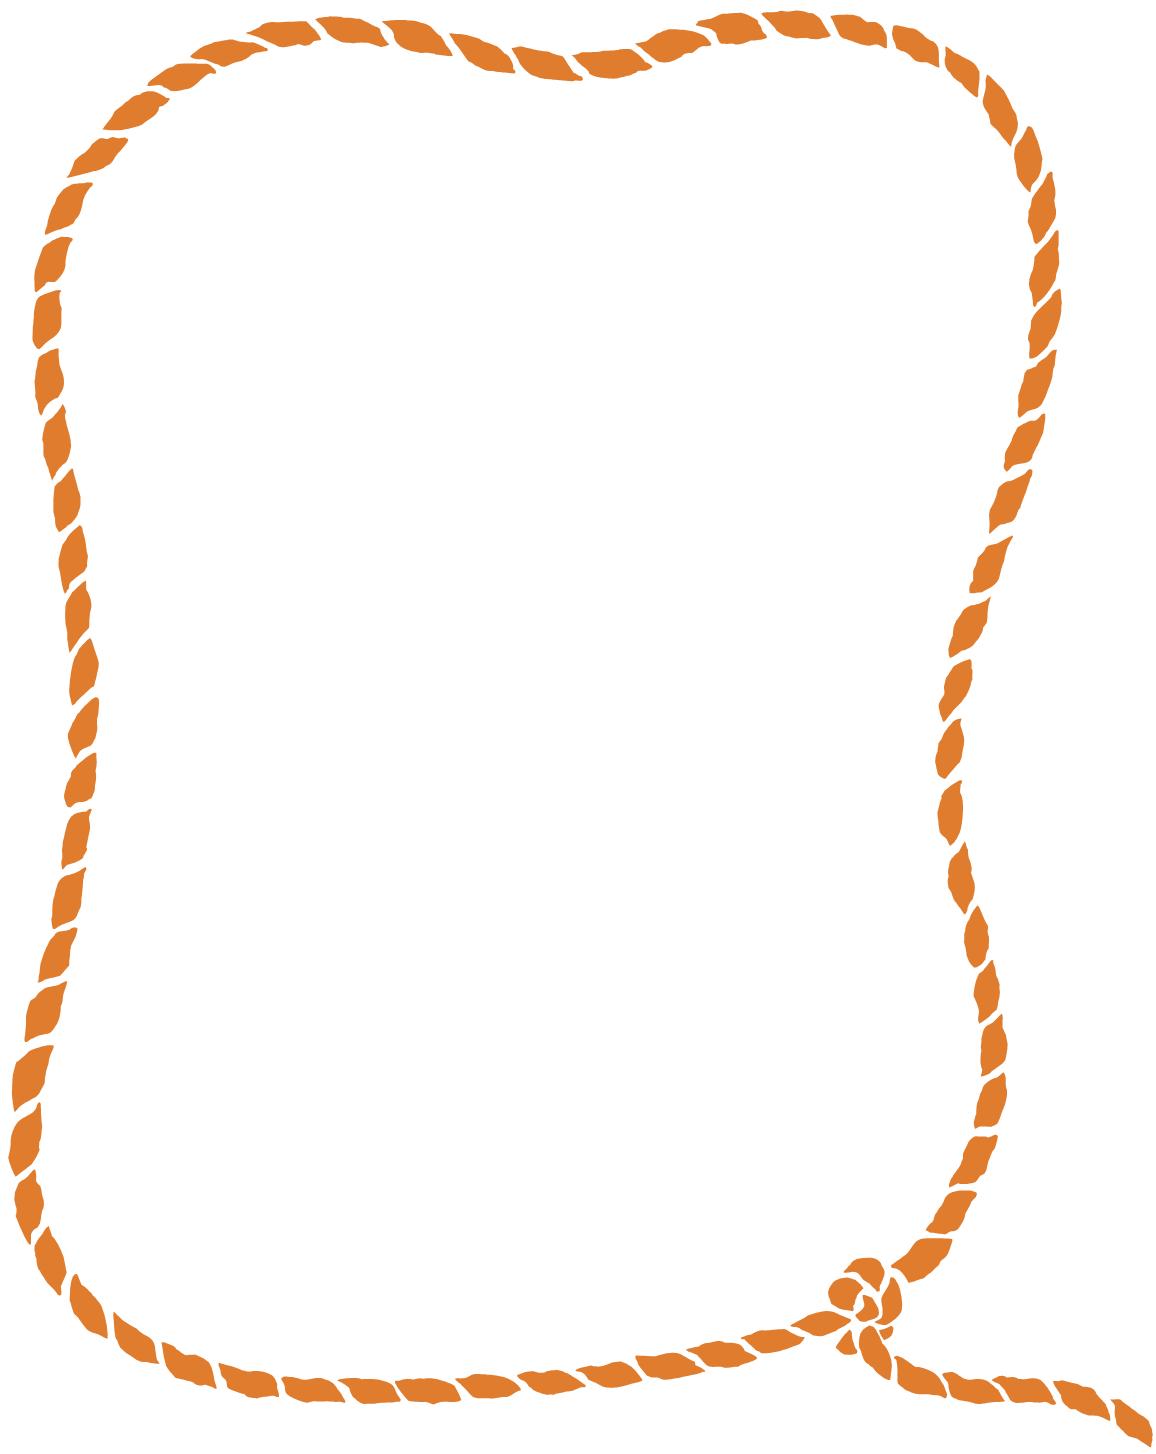 Rope Border - Clipart library